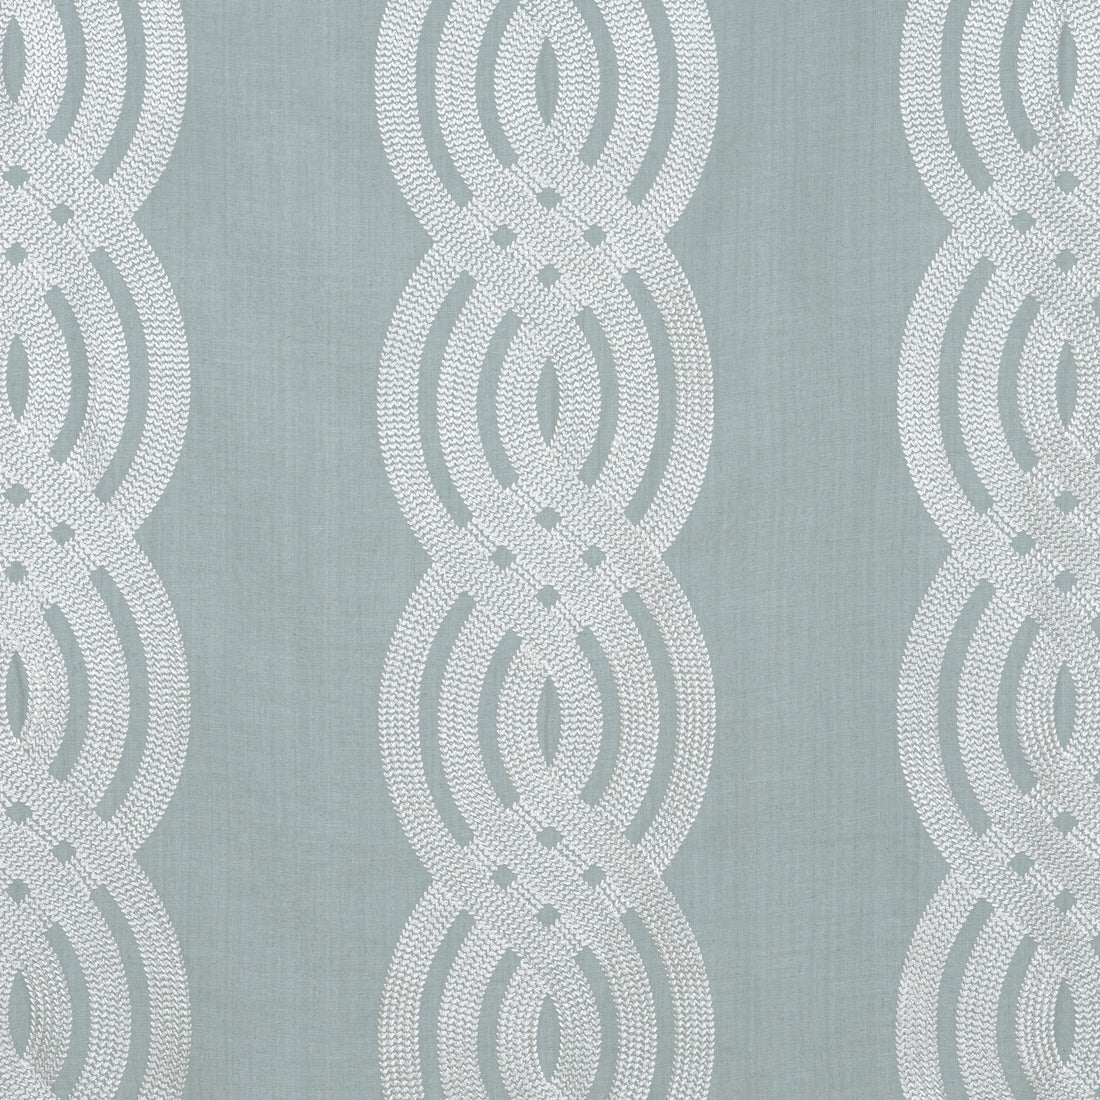 Braid Embroidery fabric in robins egg color - pattern number W710805 - by Thibaut in the Heritage collection